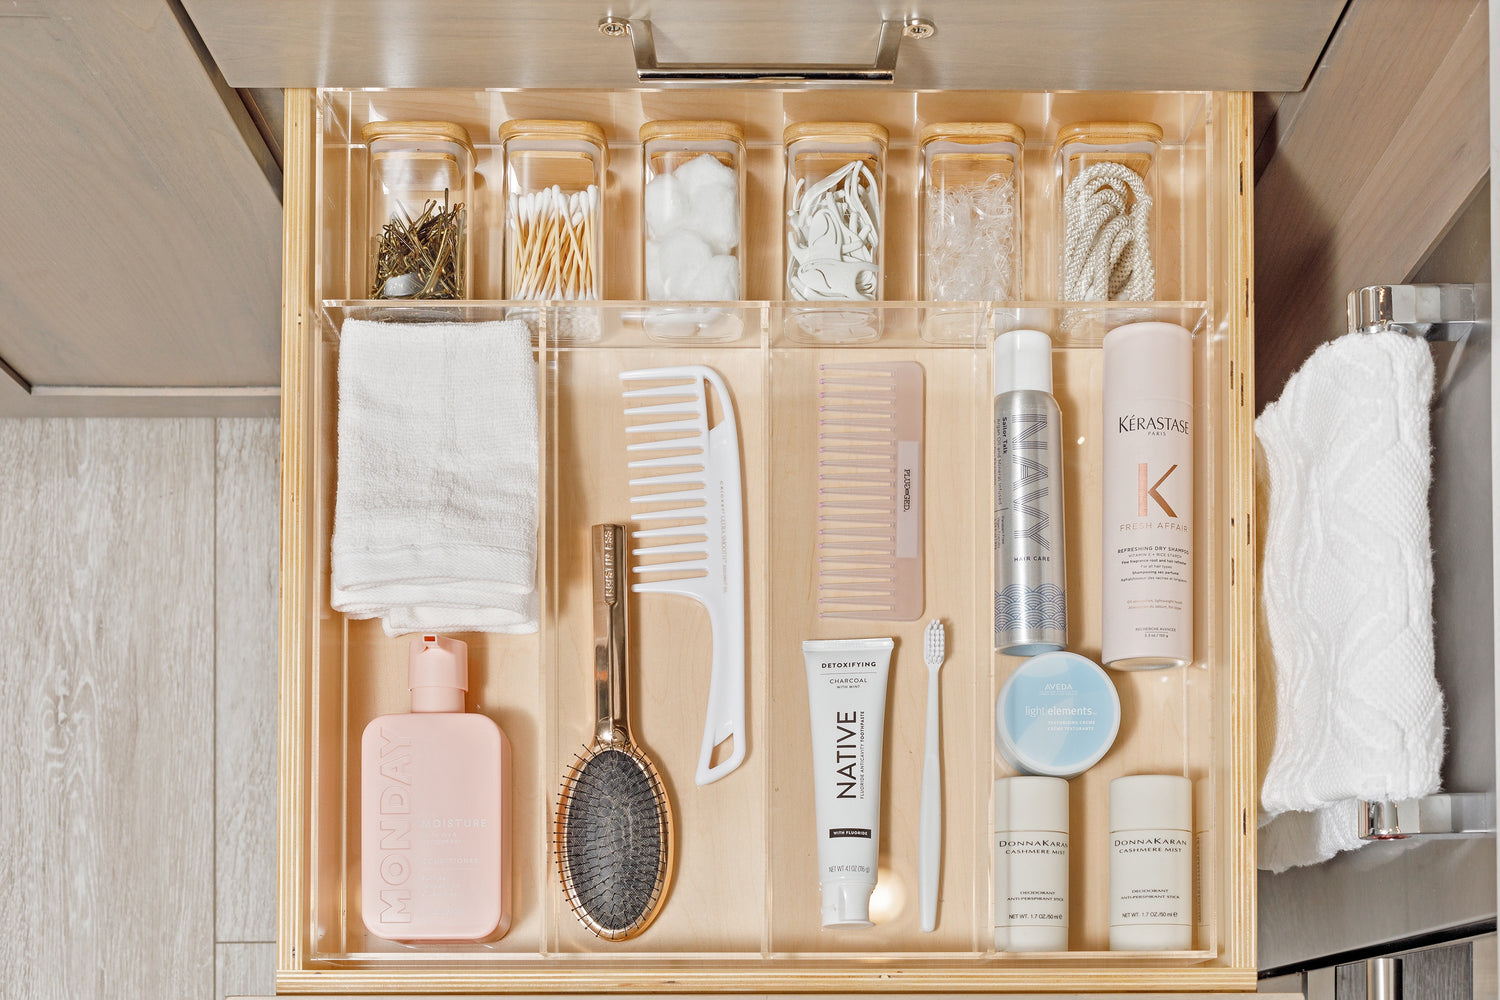 Immaculate bathroom drawer containing combs, hair products, and lotion all organized in the Karena custom-fit organzier.